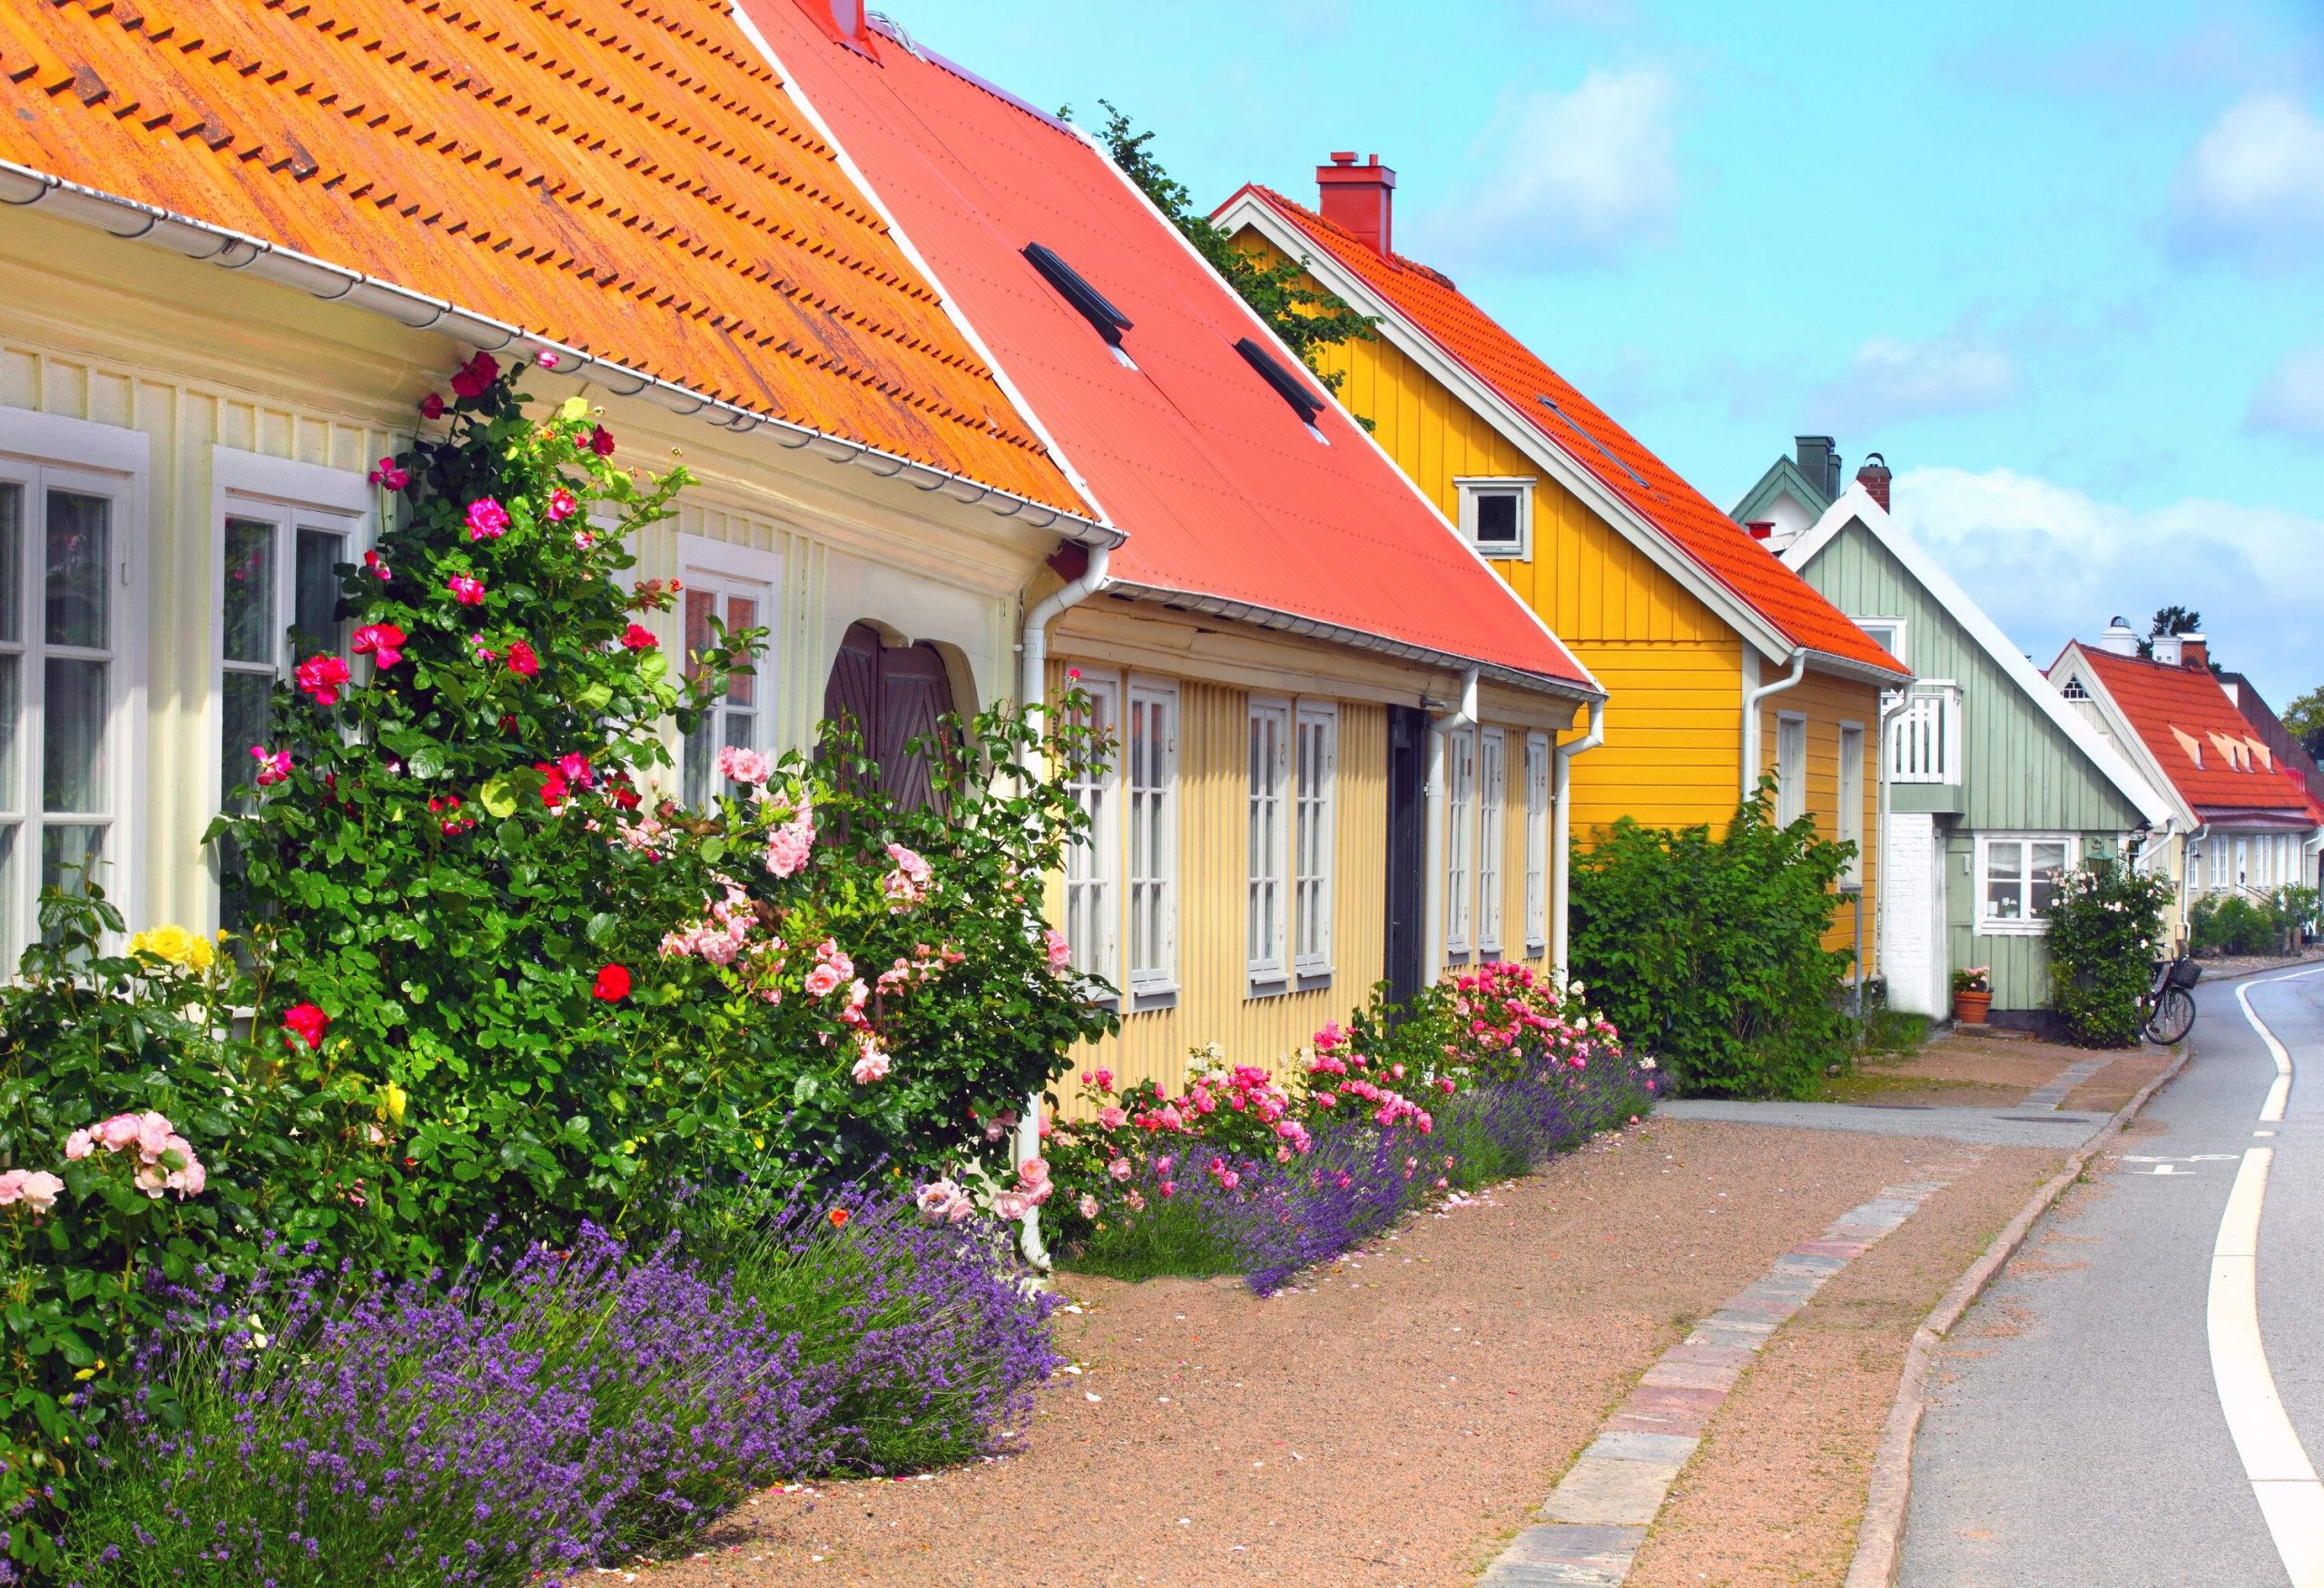 Traditional colourful houses with lush plants and flowers lined alongside an asphalt road.